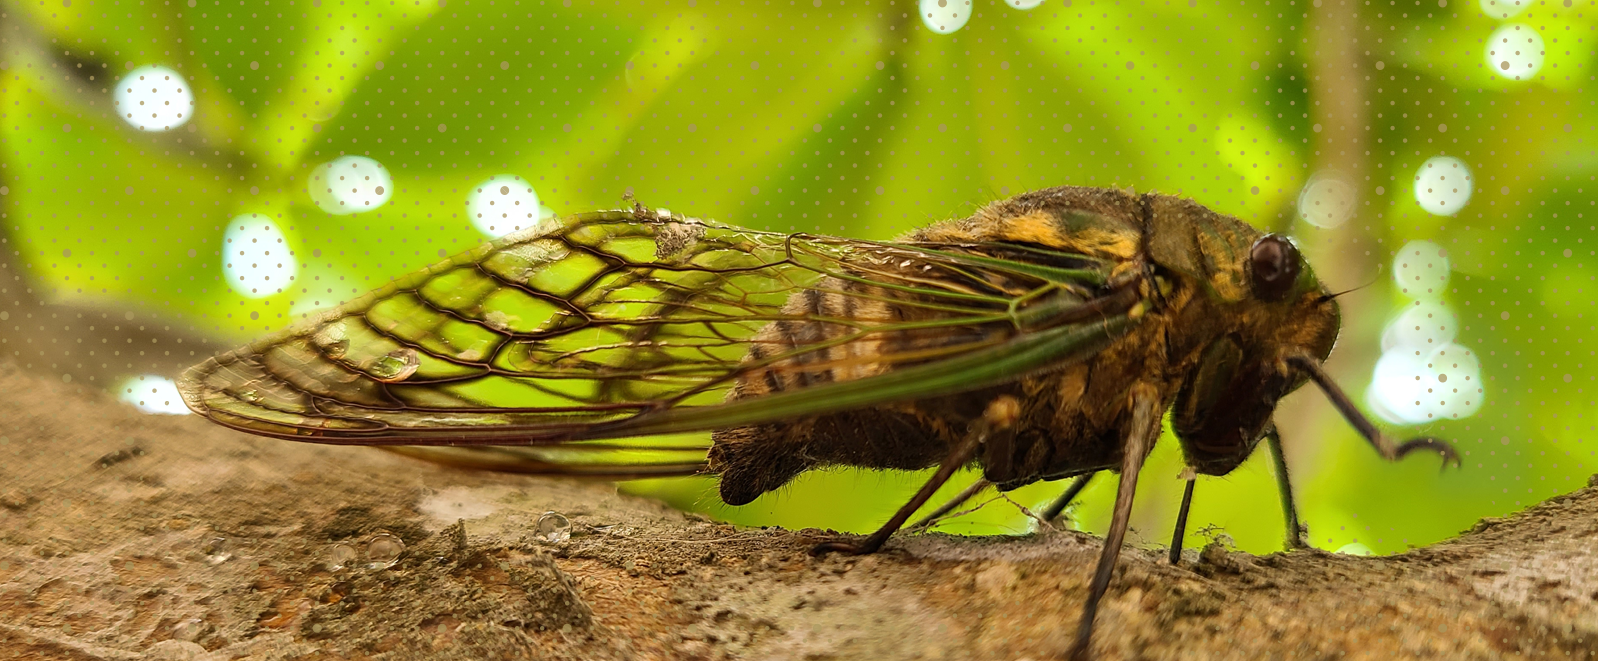 a closeup image of a cicada on a tree limb with green leaves in background